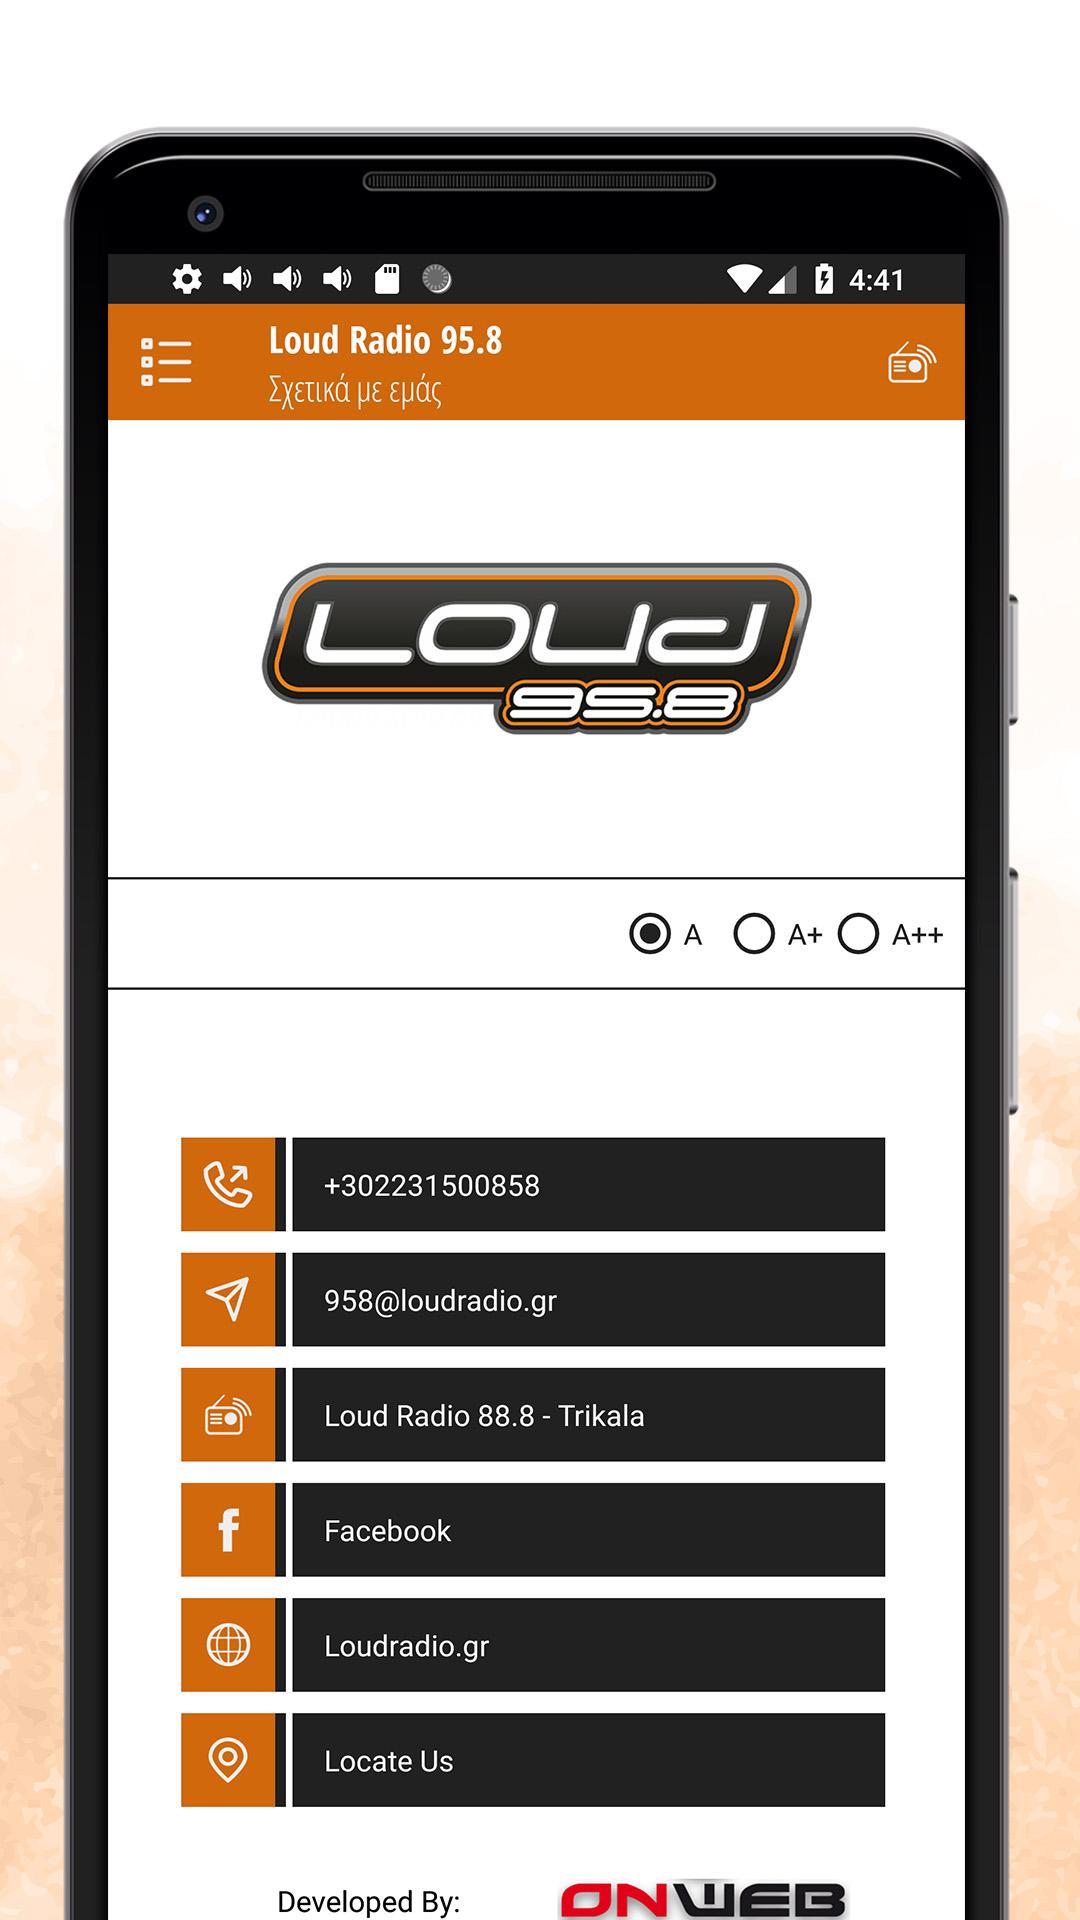 Loud Radio 95.8 for Android - APK Download